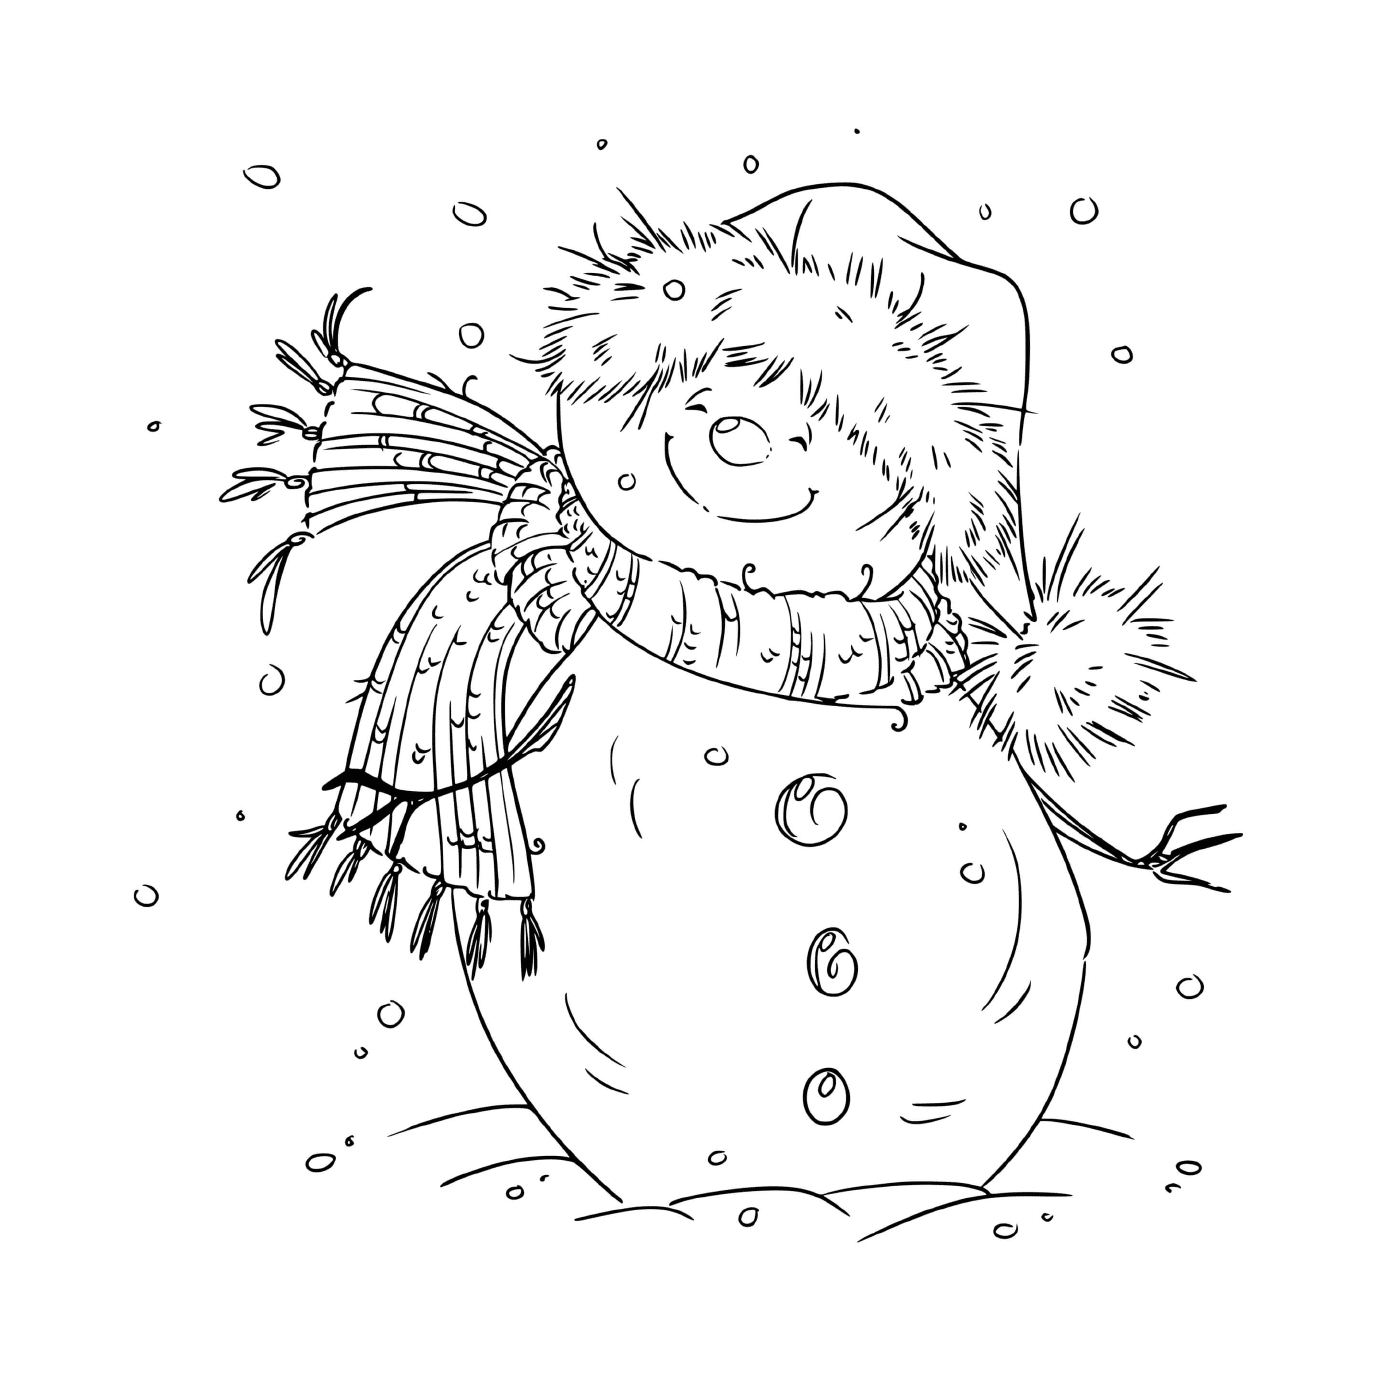  A snowman smiling by the fresh wind on Christmas Eve 